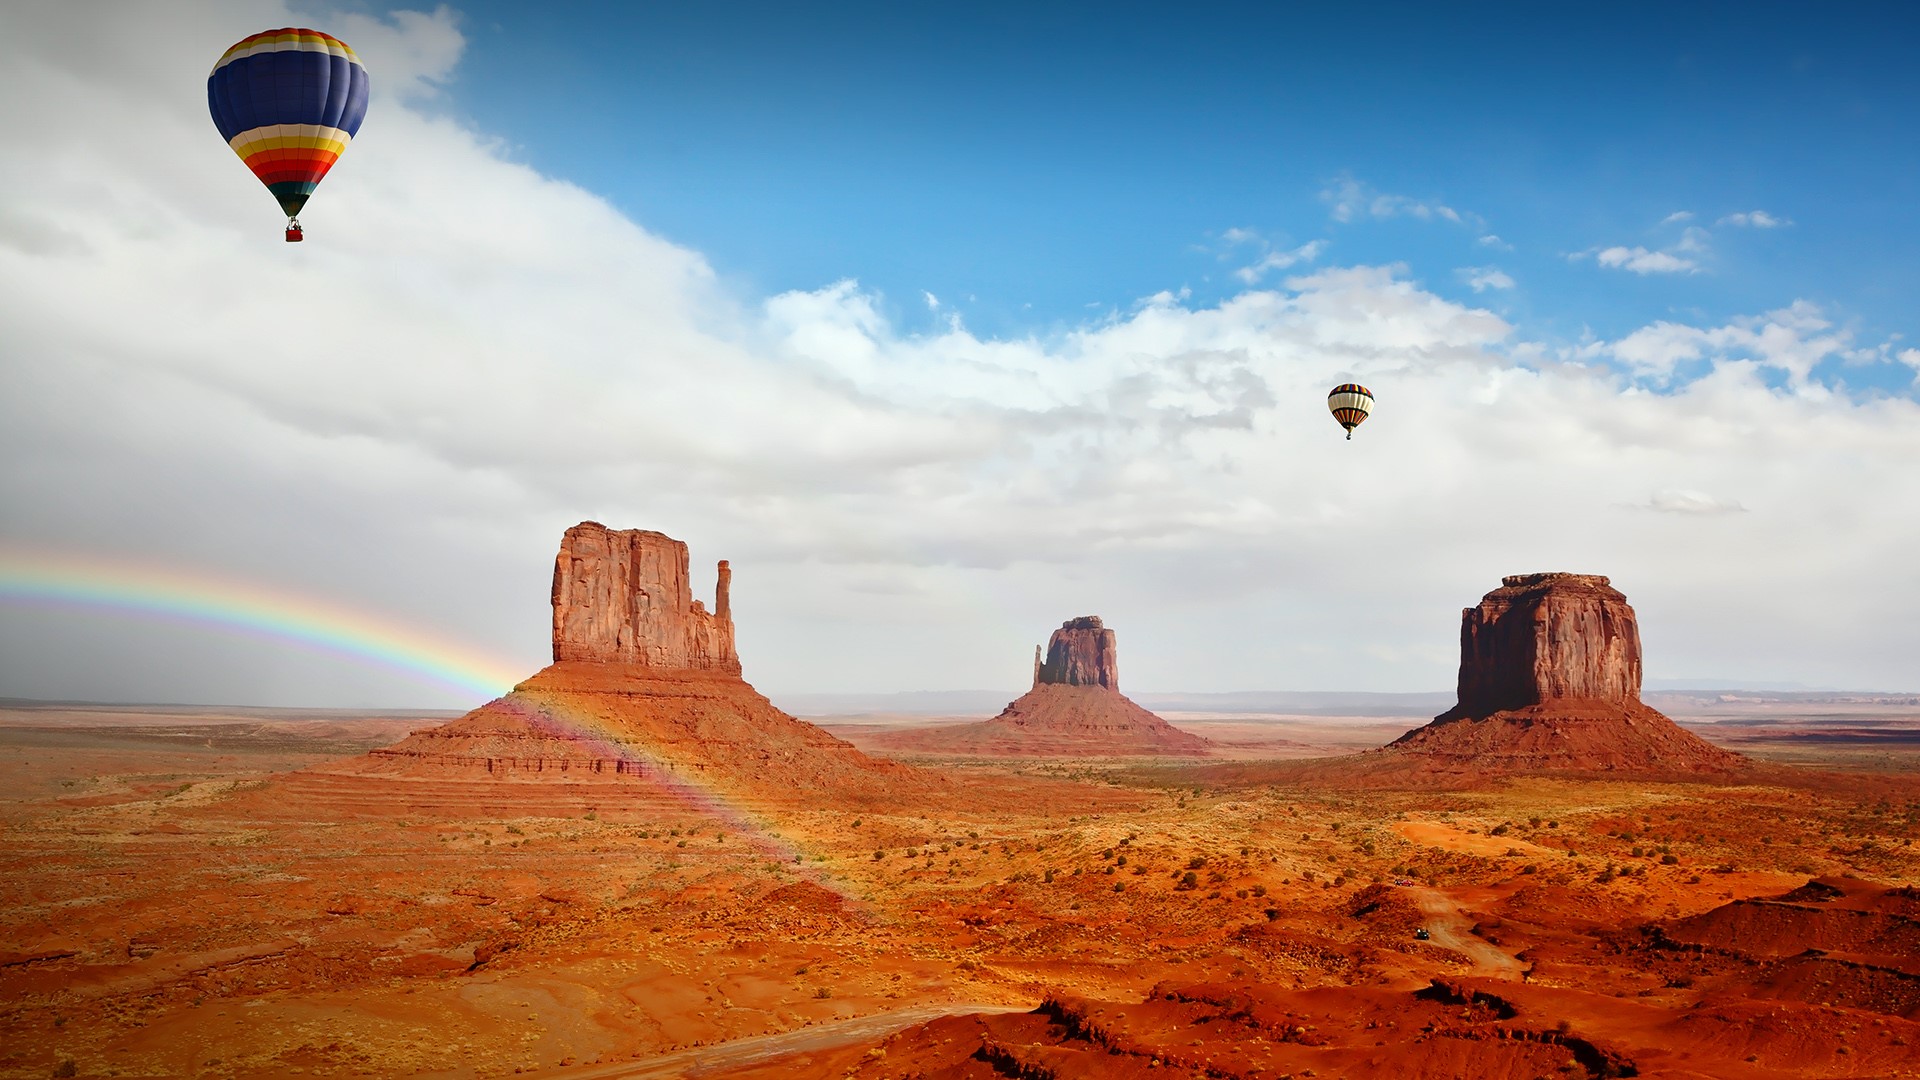 General 1920x1080 nature landscape hot air balloons canyon valley rocks plants rainbows clouds sky Monument Valley Arizona USA